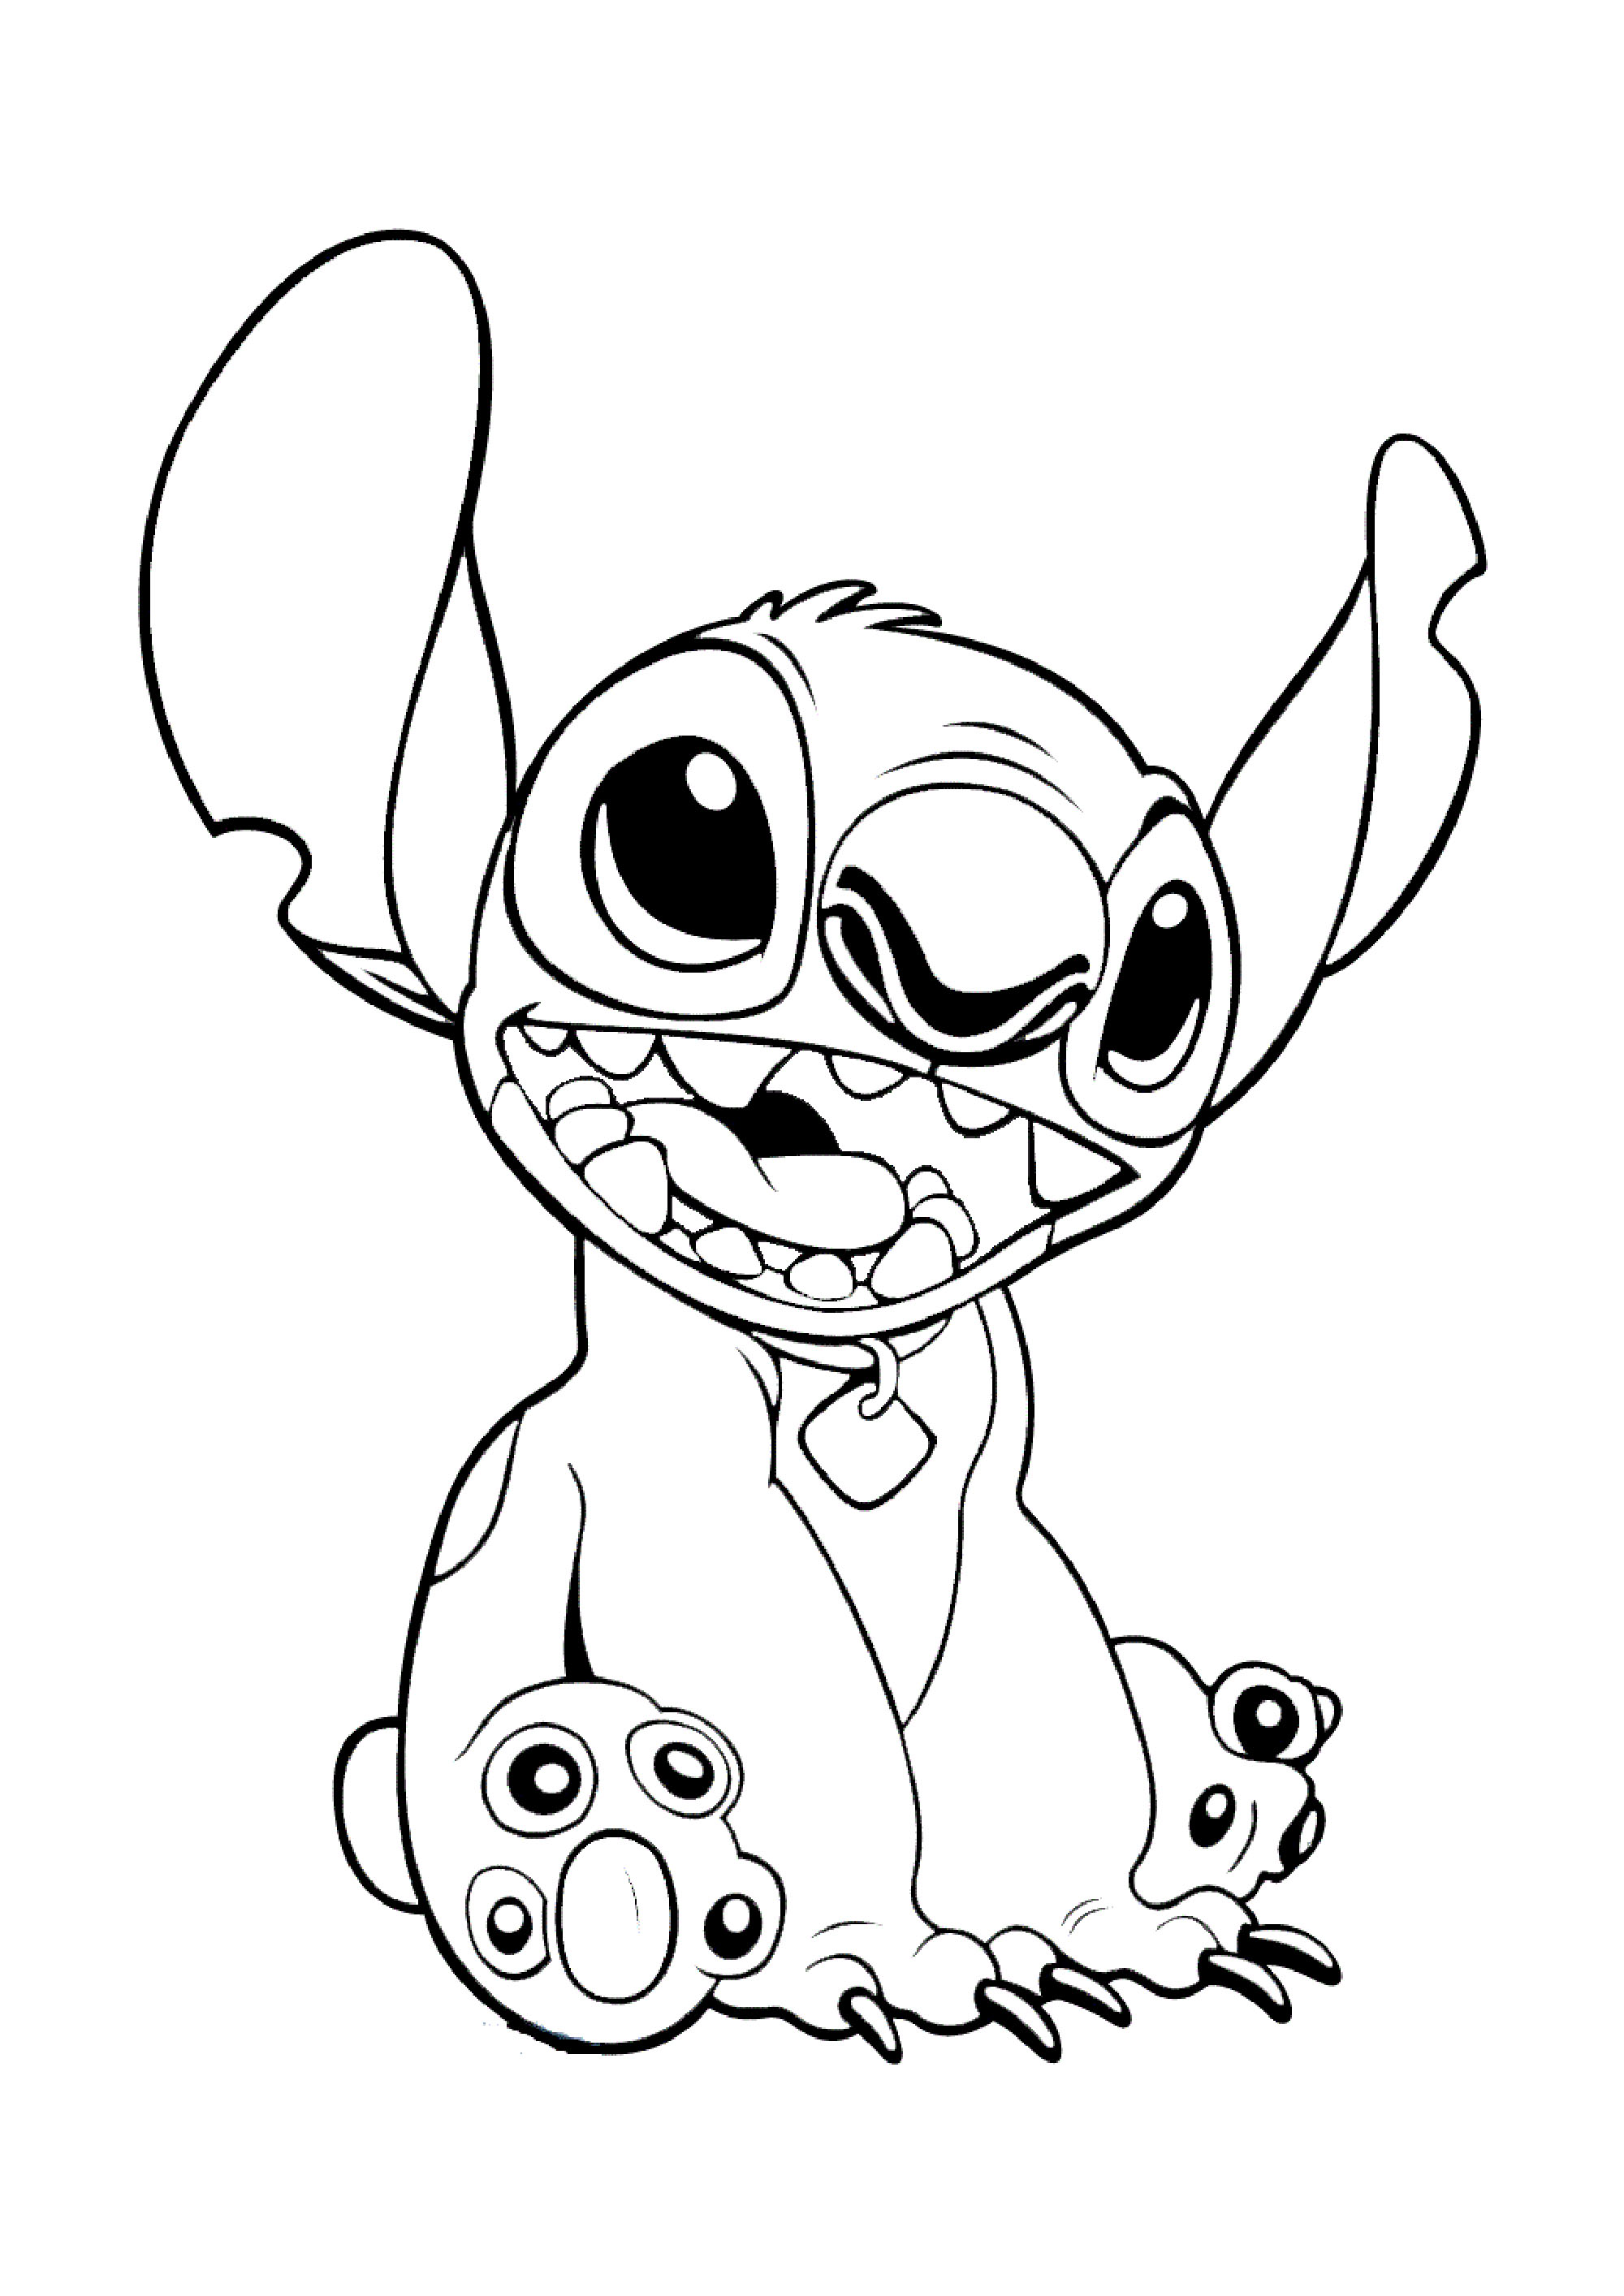 lilo-stitch-coloring-page-15-coloring-page-for-kids-free-lilo-images